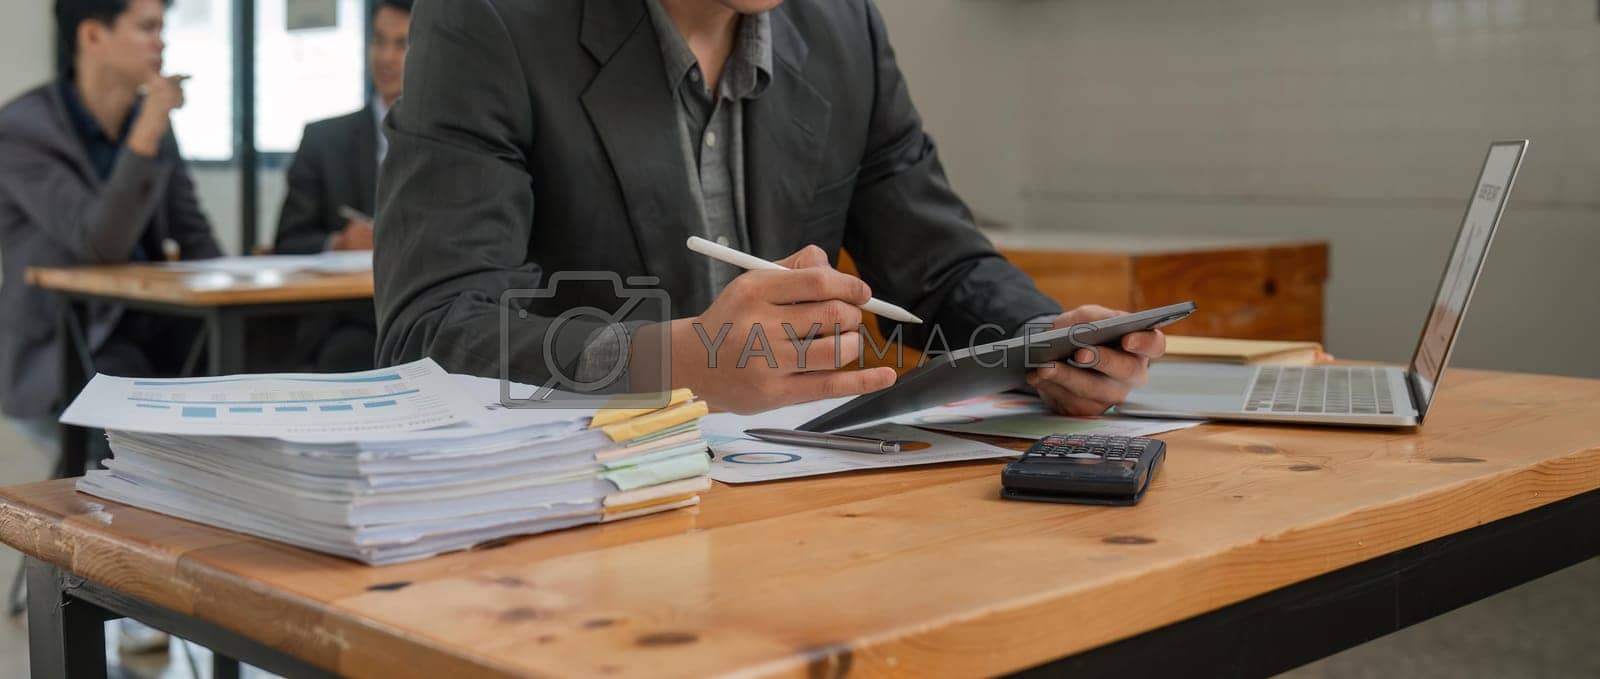 Royalty free image of Business accounting concept, Business man using calculator with computer laptop and tablet in office by nateemee